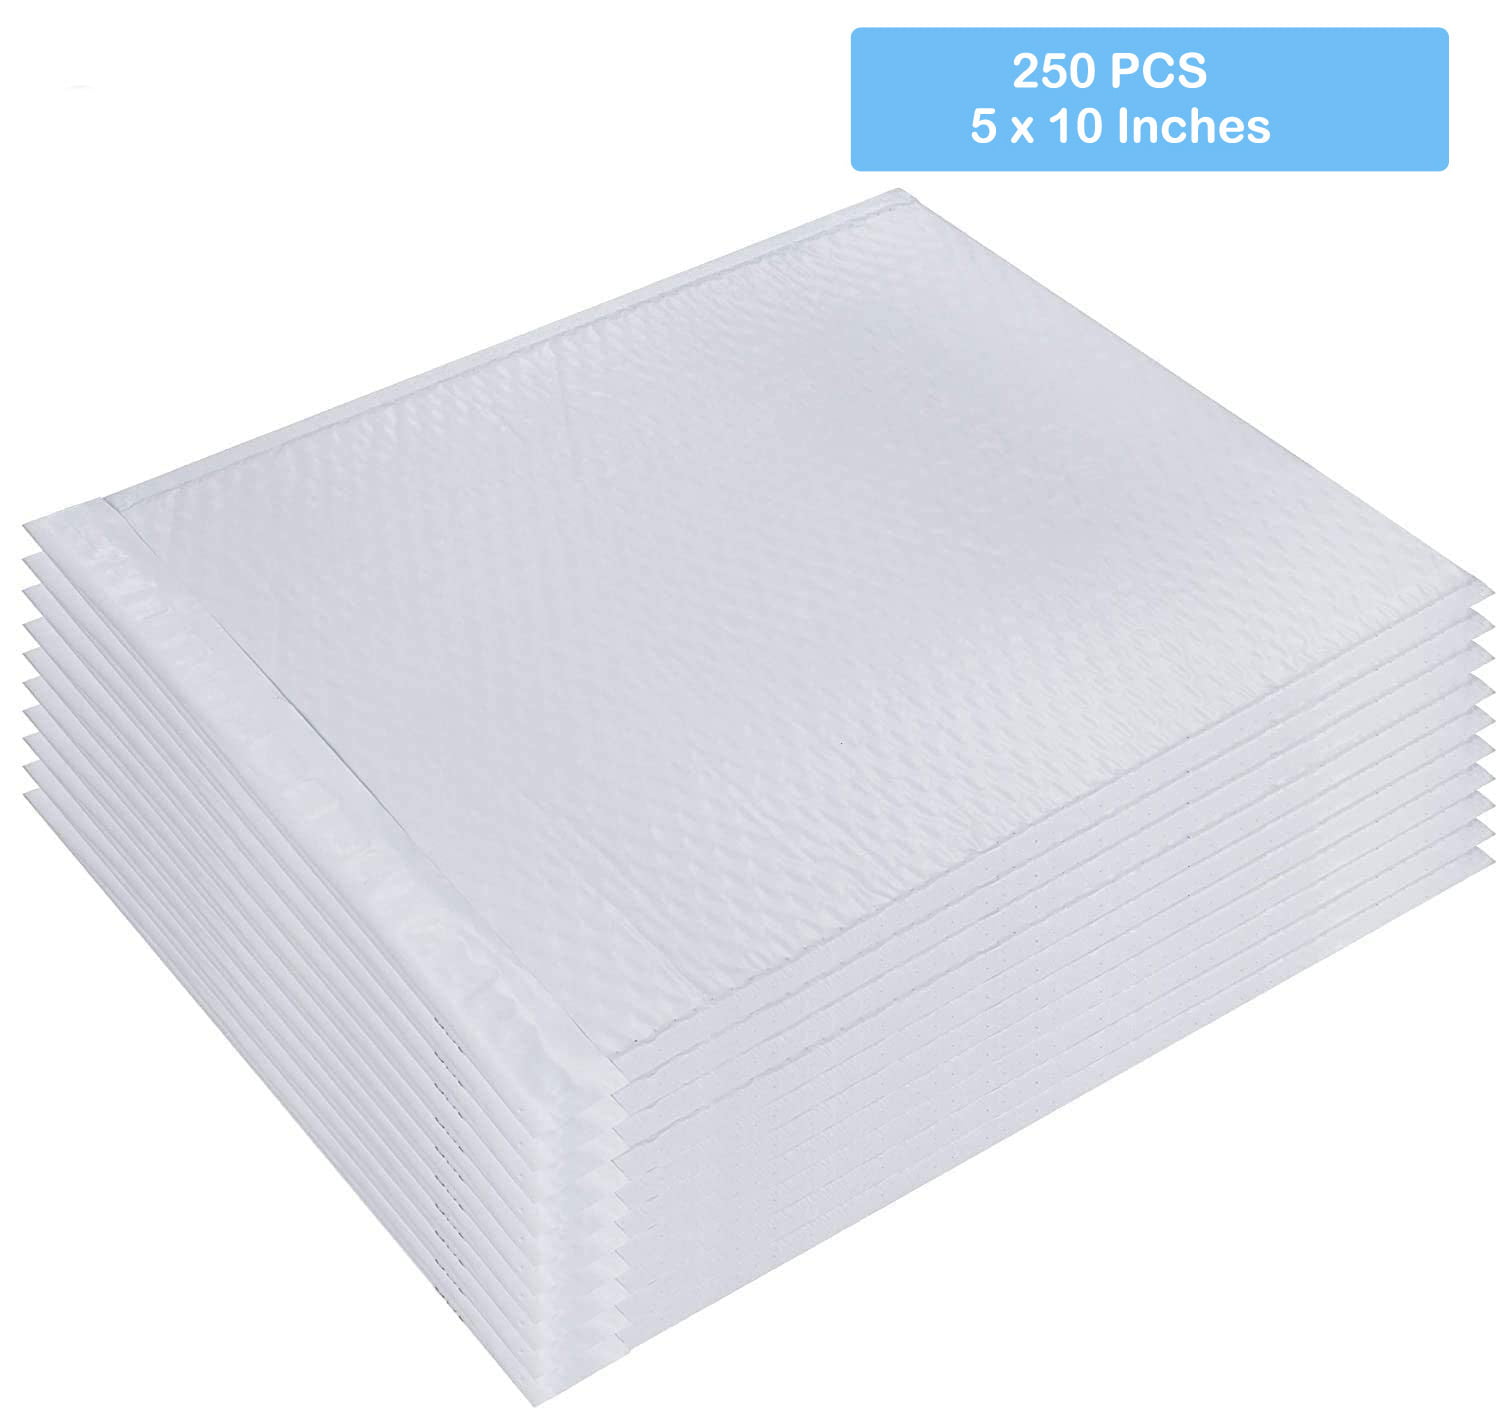 Branded Shipping Supplies Padded Bubble Poly Mailers Envelopes 6.5" x 8.5" 